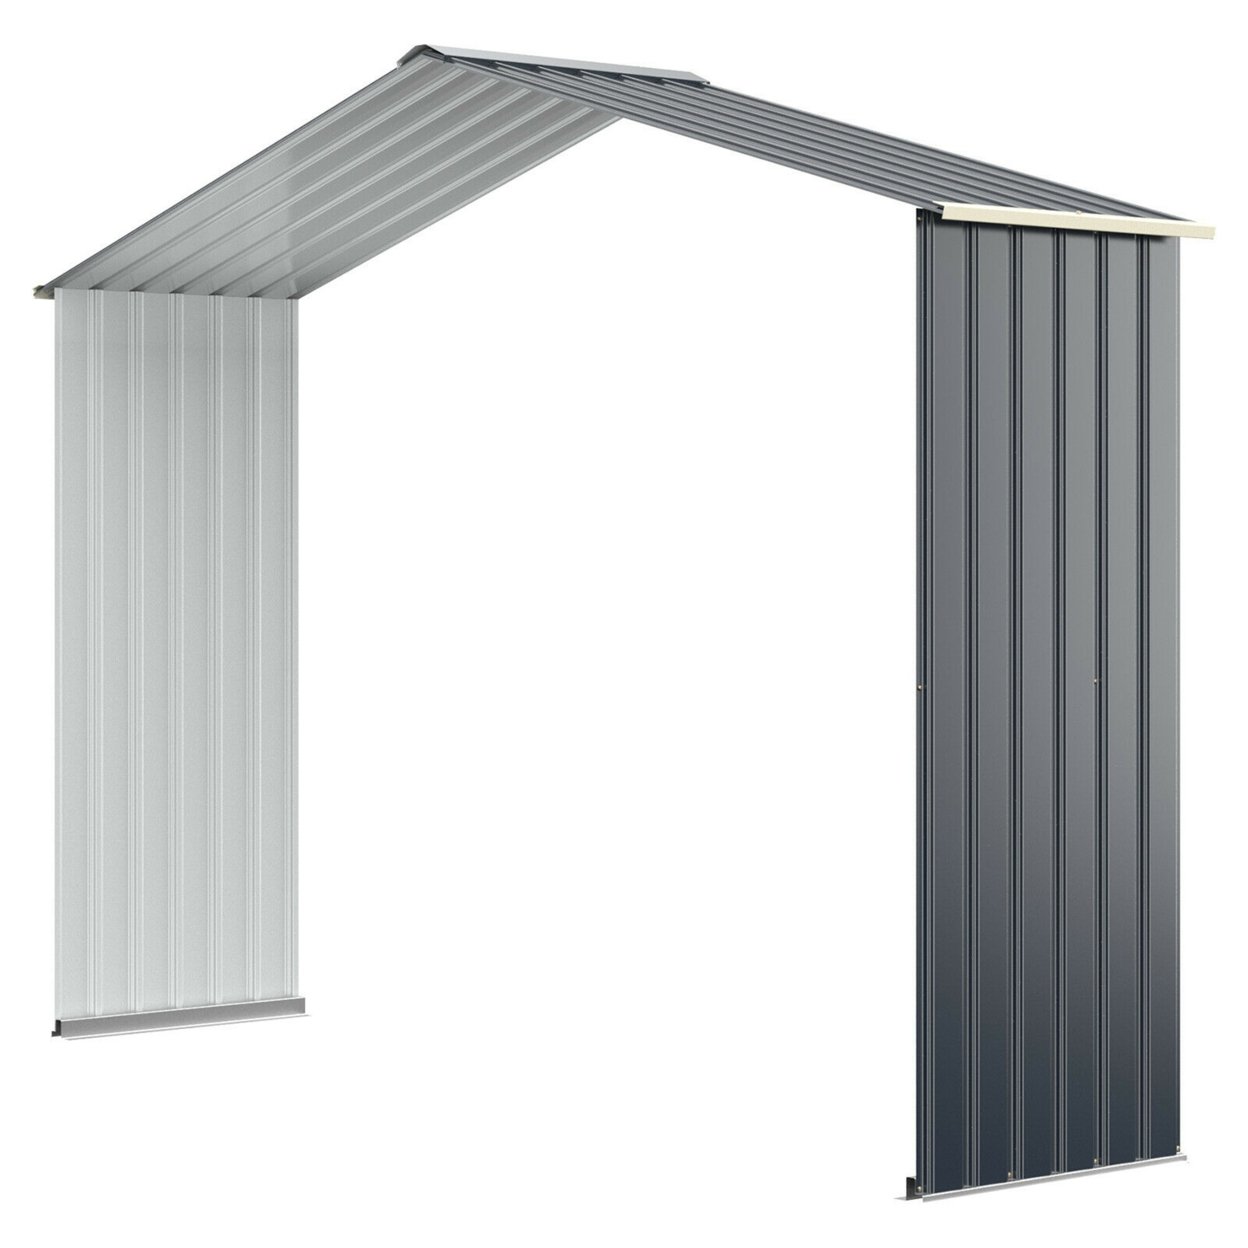 Outdoor Storage Shed Extension Kit For 7/9.1/11.2 Ft Shed Width Grey - Grey, For 9.1 Ft Shed